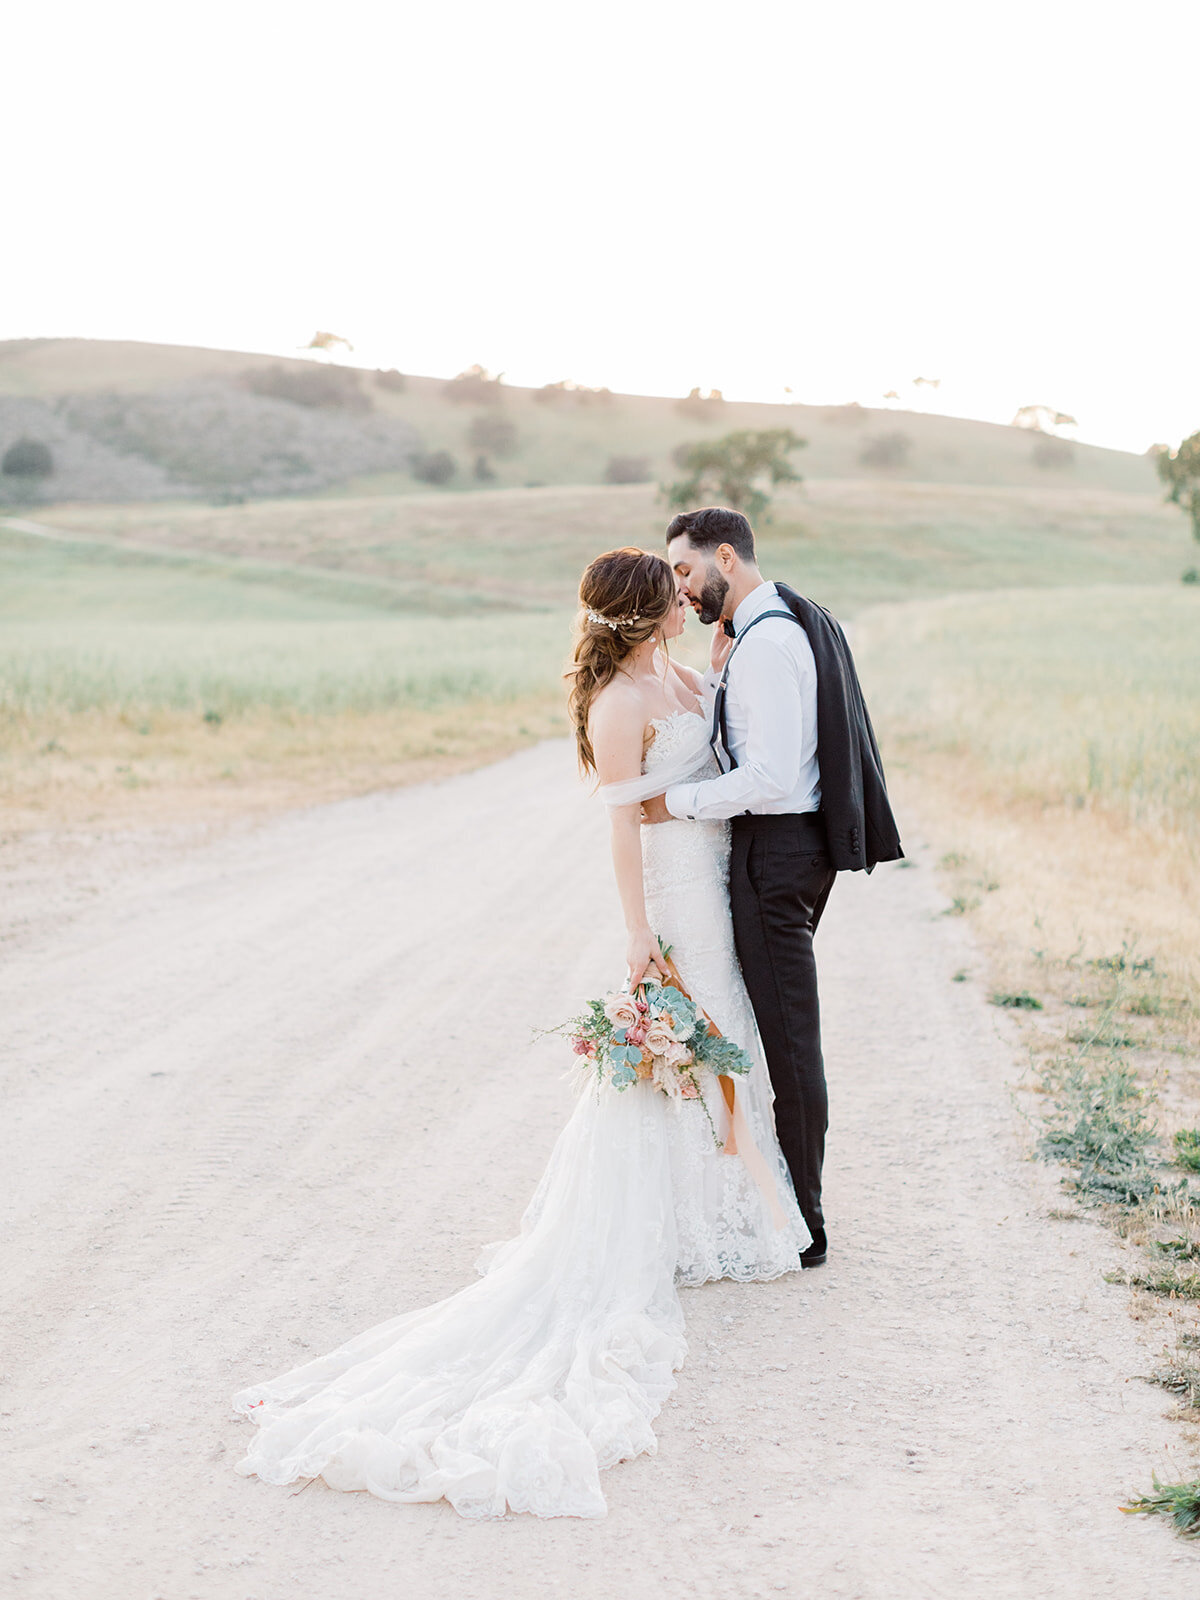 bride and groom standing on a dirt road through field and kissing